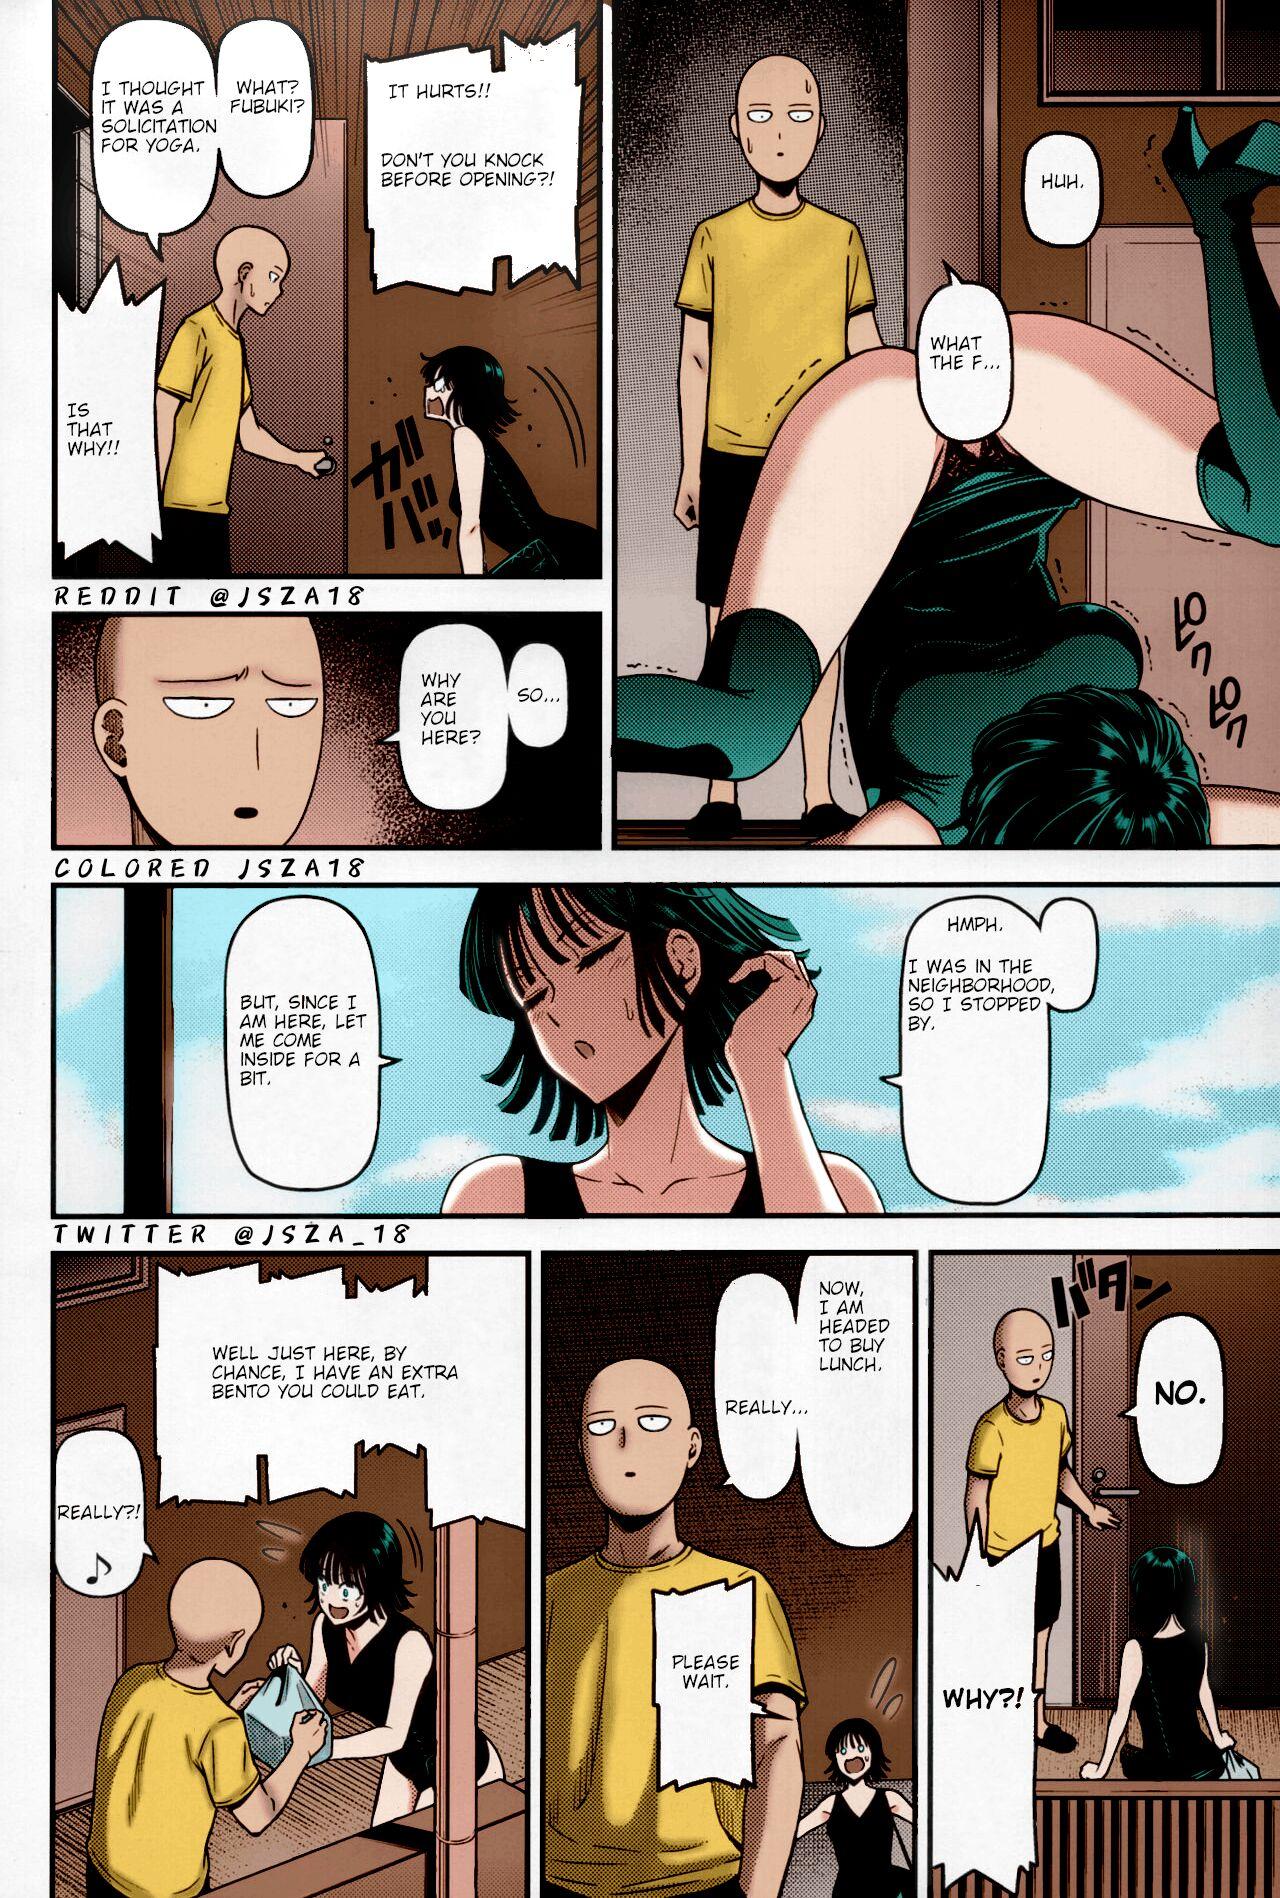 Gay Hairy ONE-HURRICANE 6 - One punch man Gay Anal - Page 3